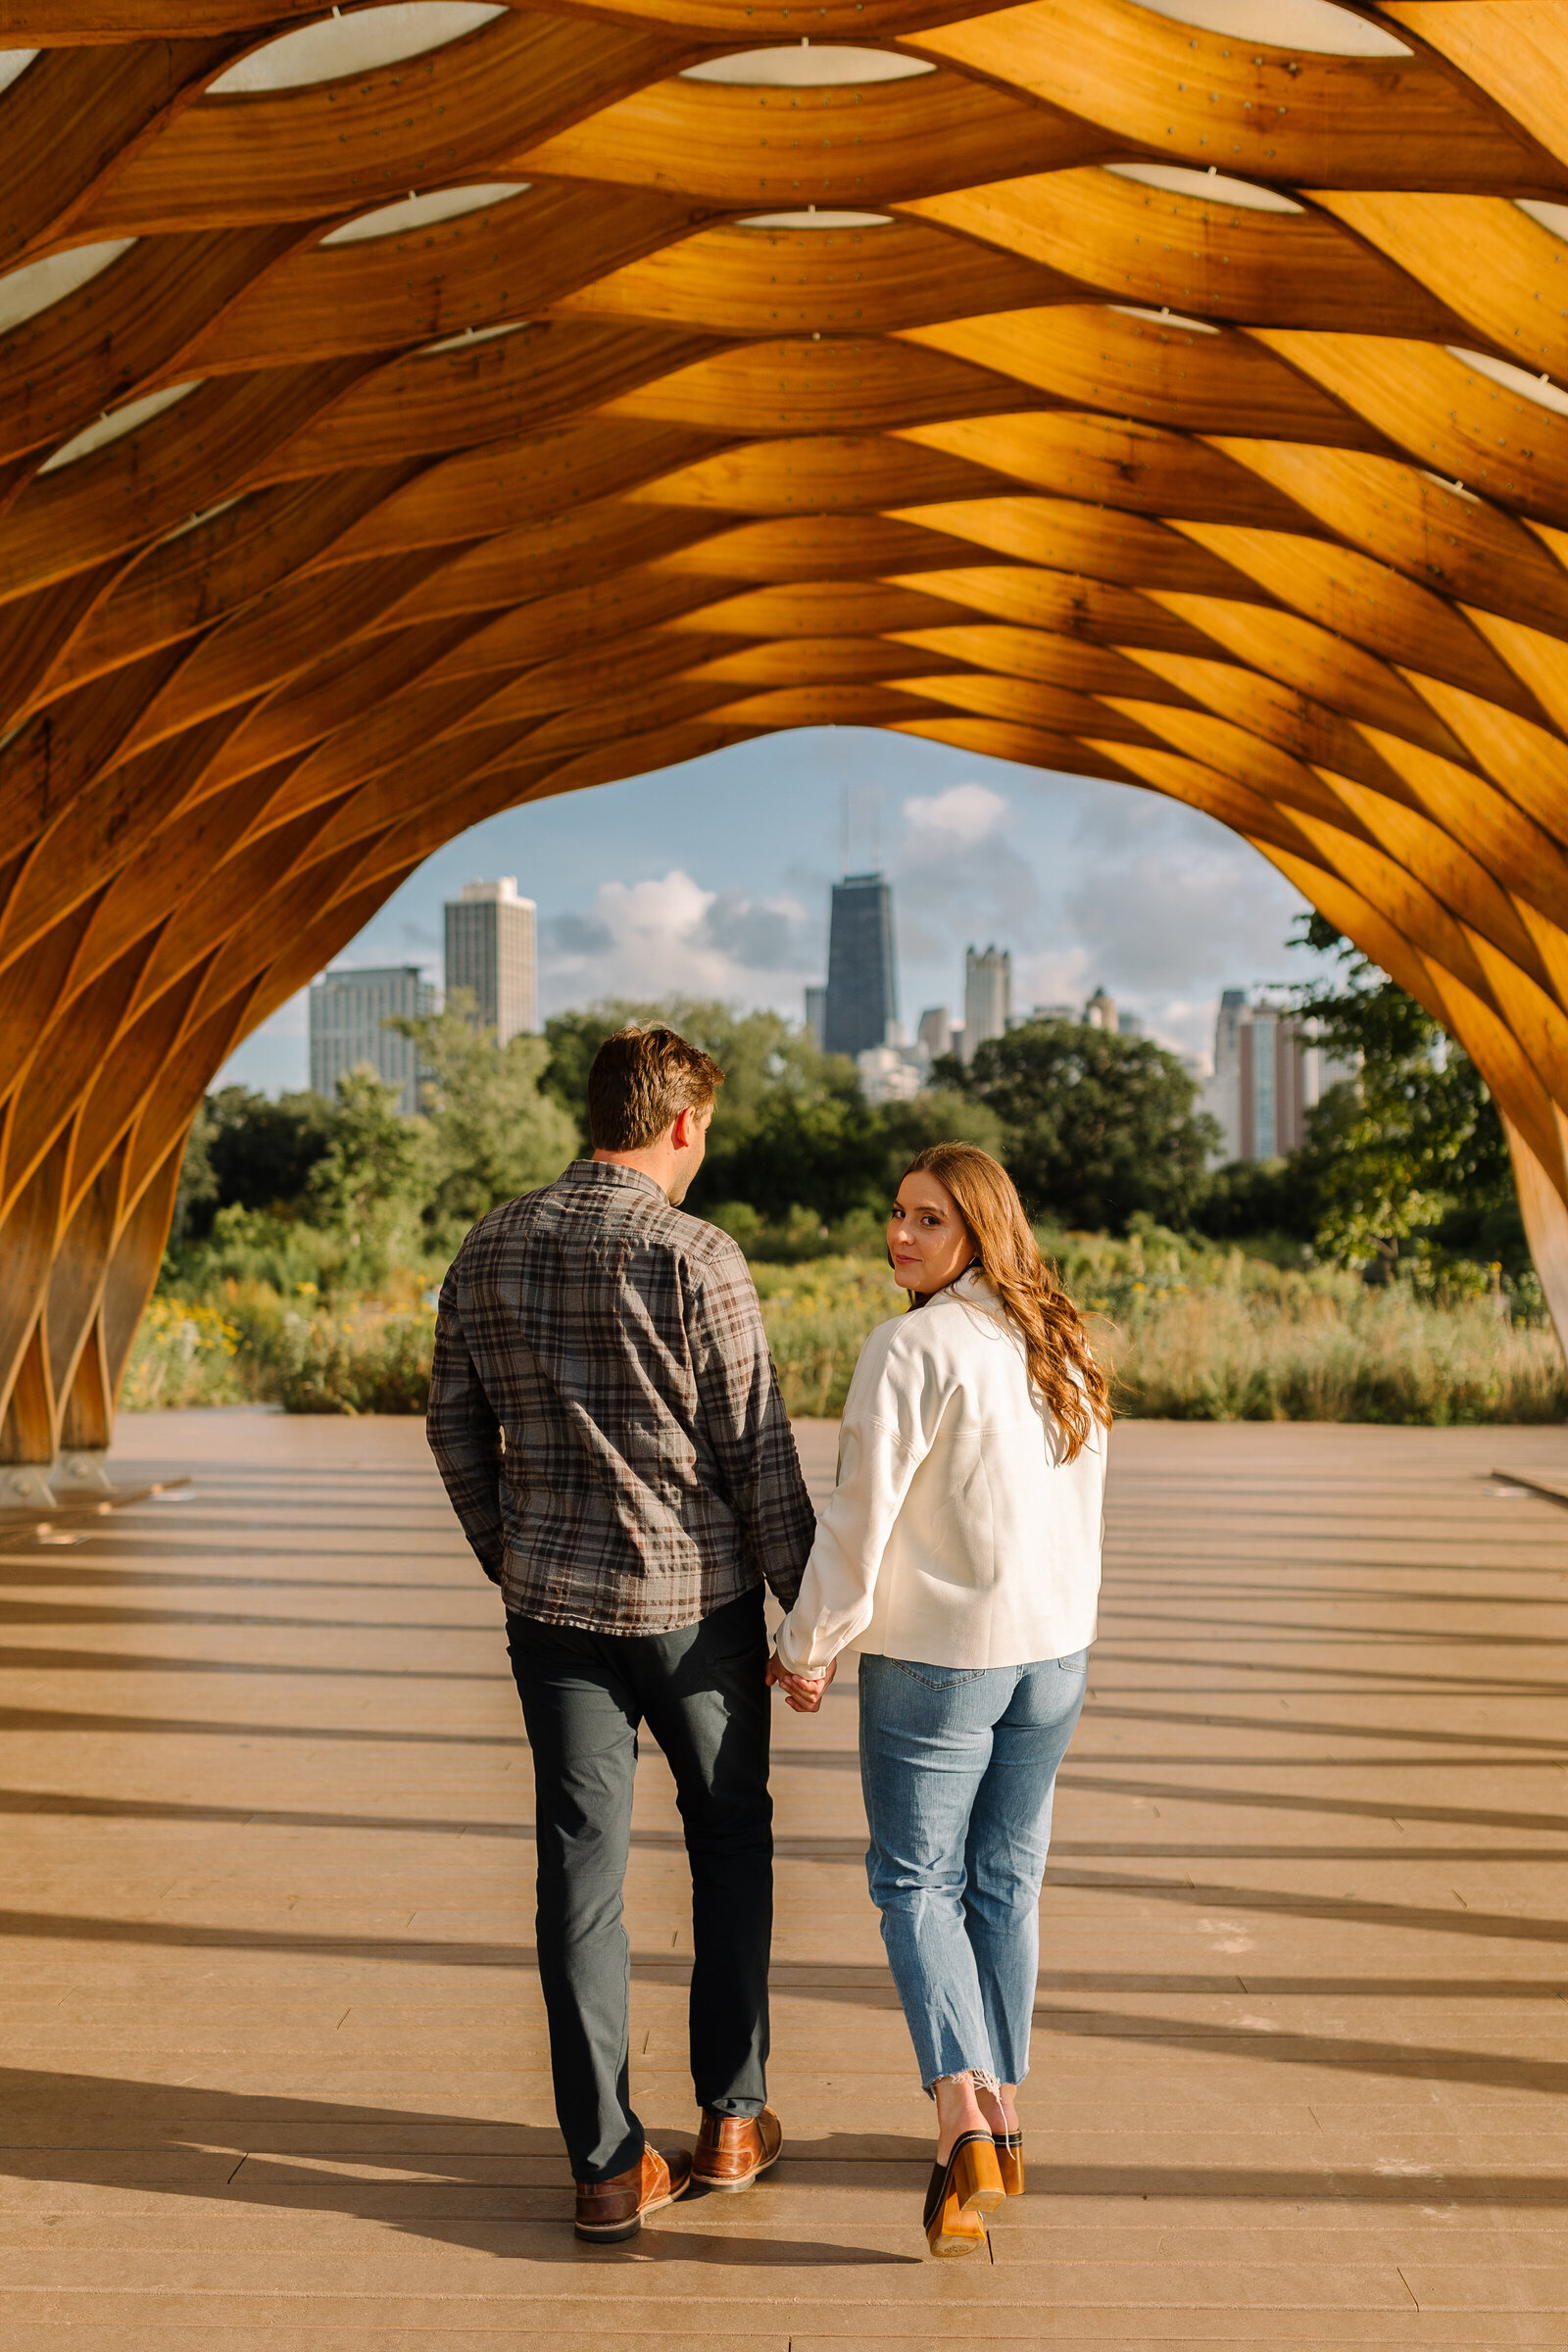 Newly engaged couple walking together while hugging each other under the honeycomb sculpture in Chicago